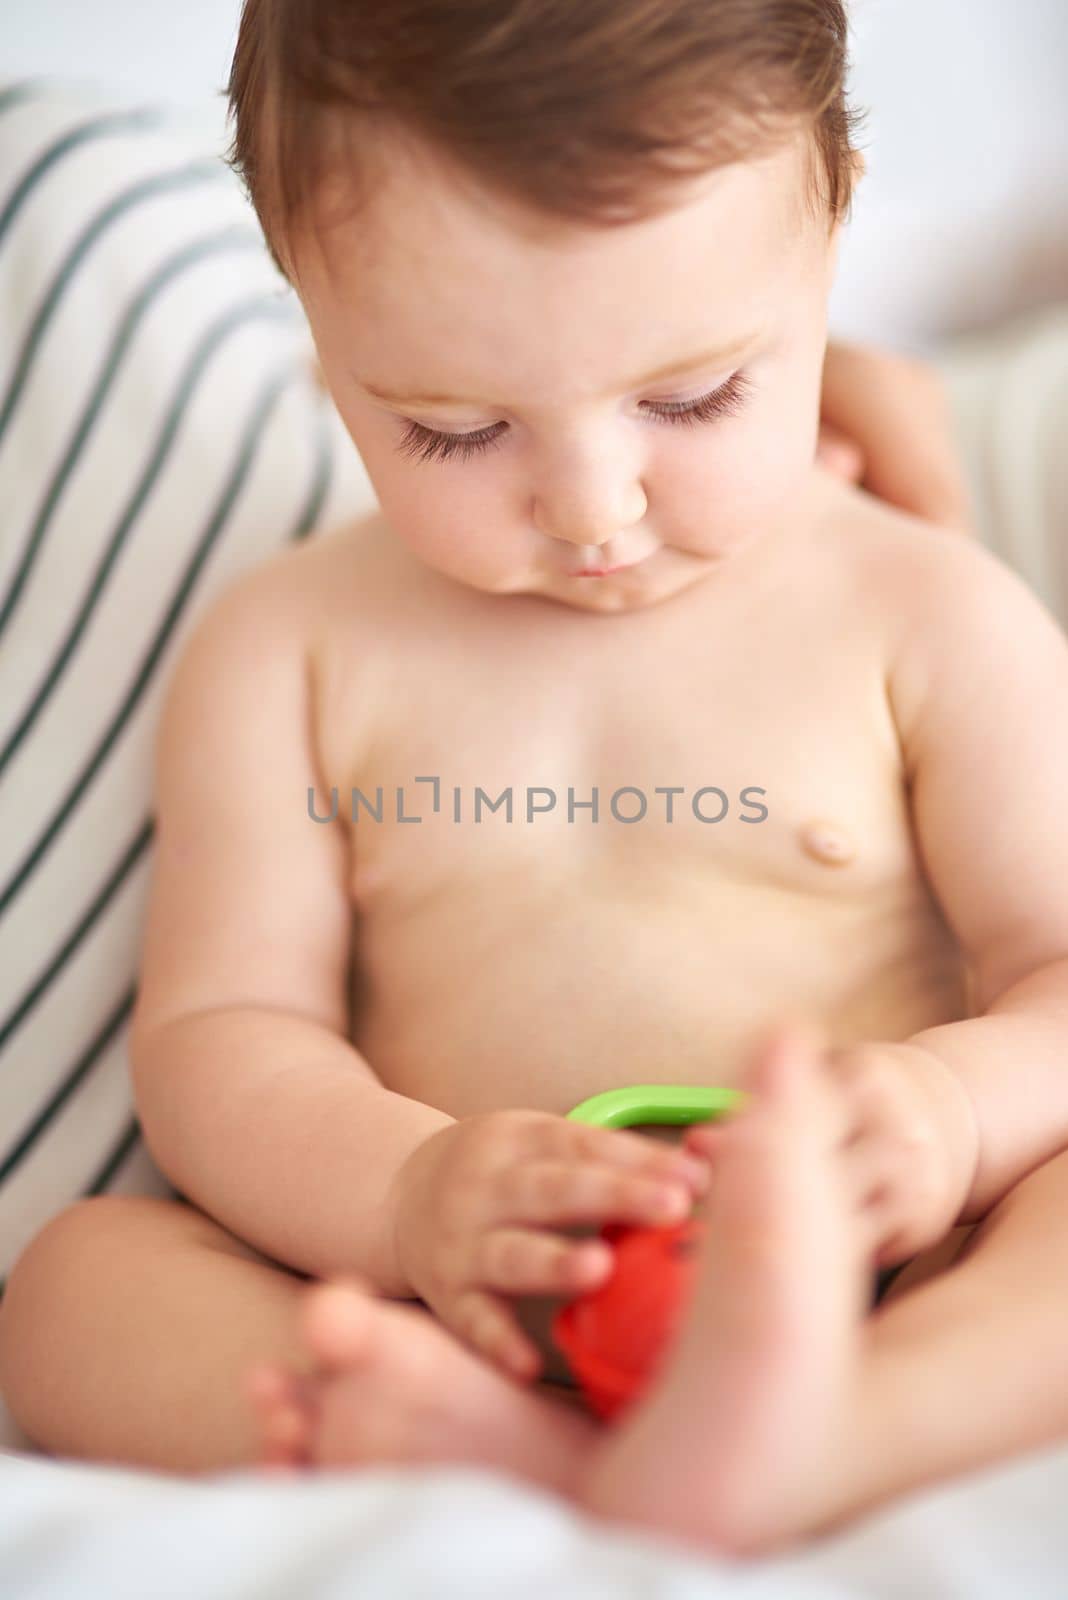 Whats going on over here. an adorable baby girl playing with a toy. by YuriArcurs